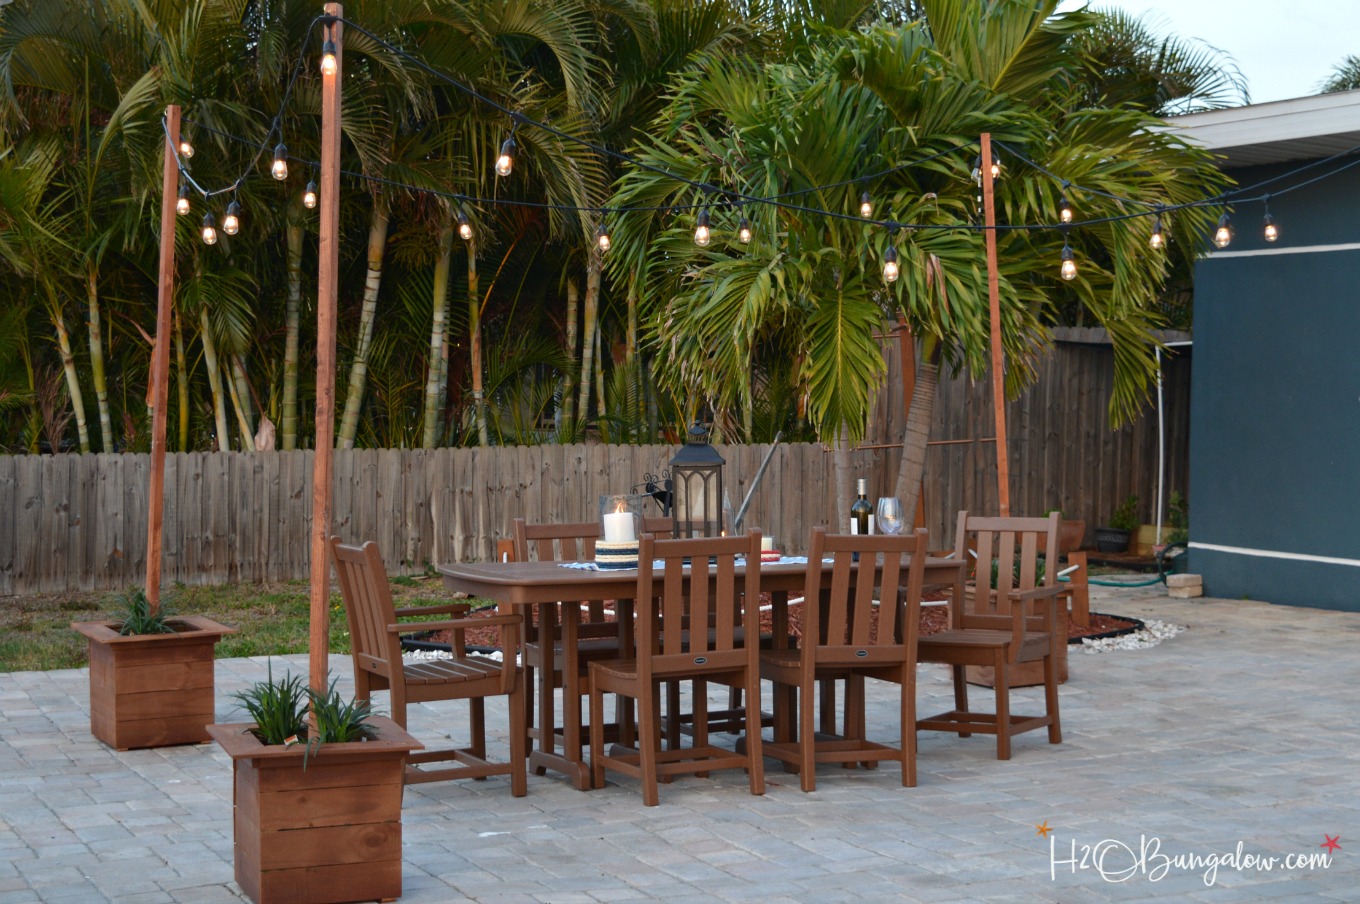 DIY outdoor string lights on poles shown on patio with wood patio table and chairs